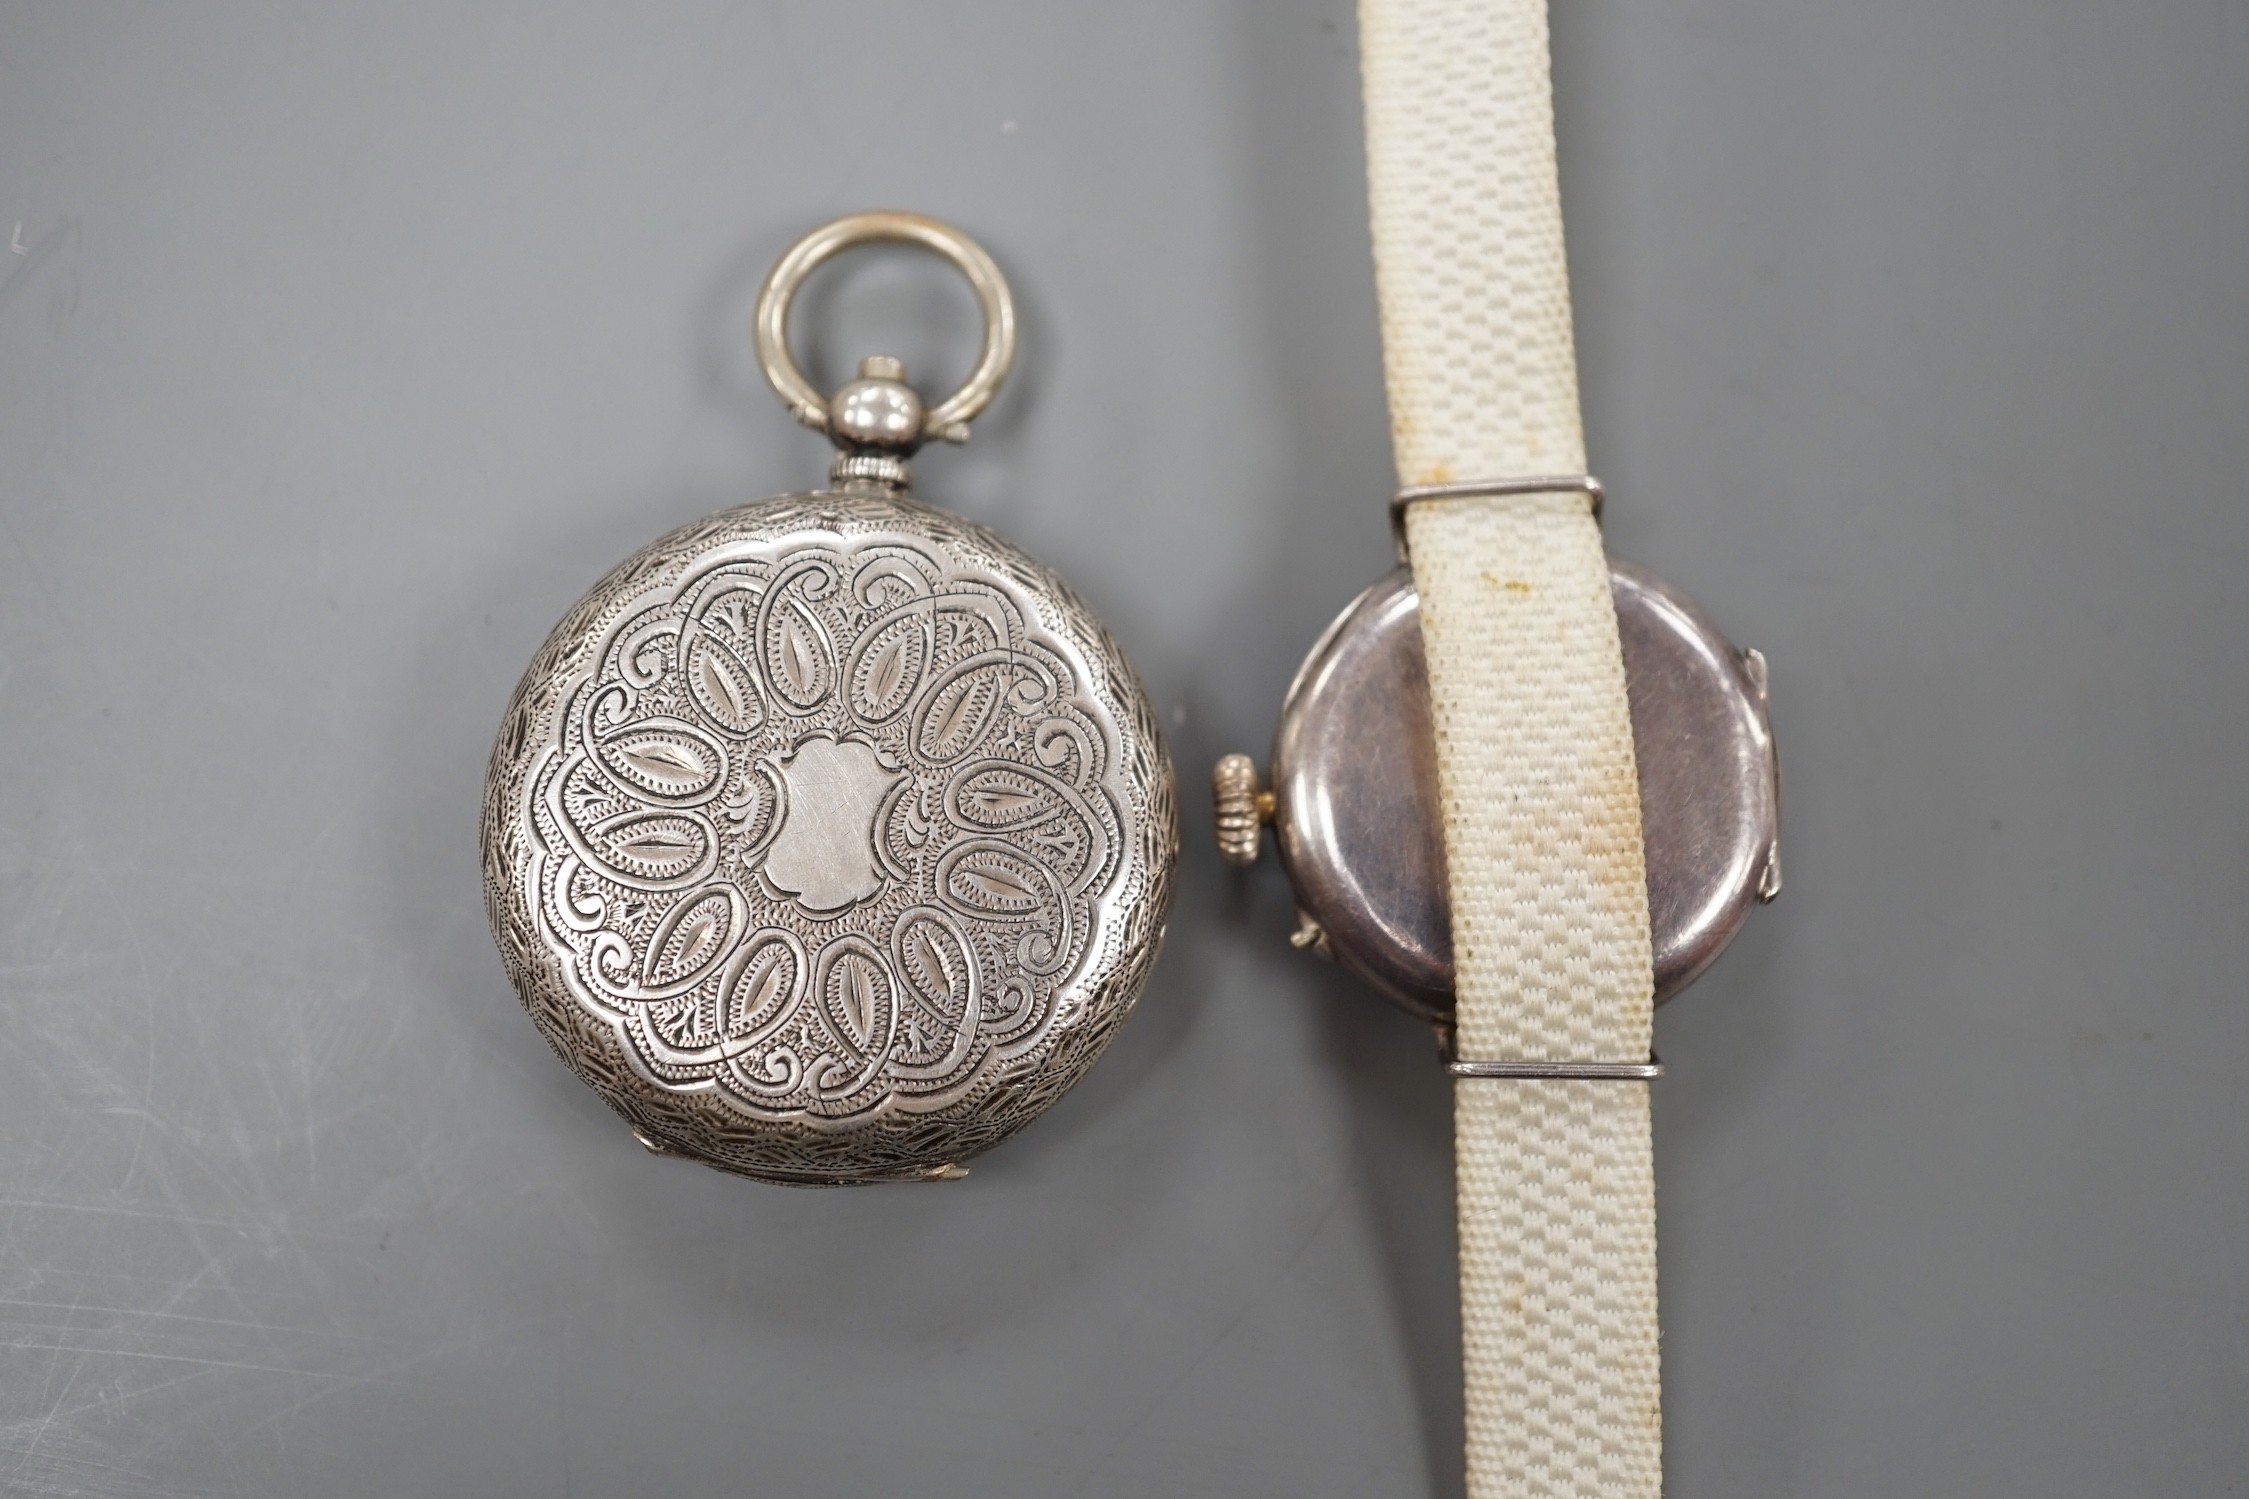 A lady's early 20th century silver and enamel manual wind wrist watch and an 800 standard white metal fob watch.